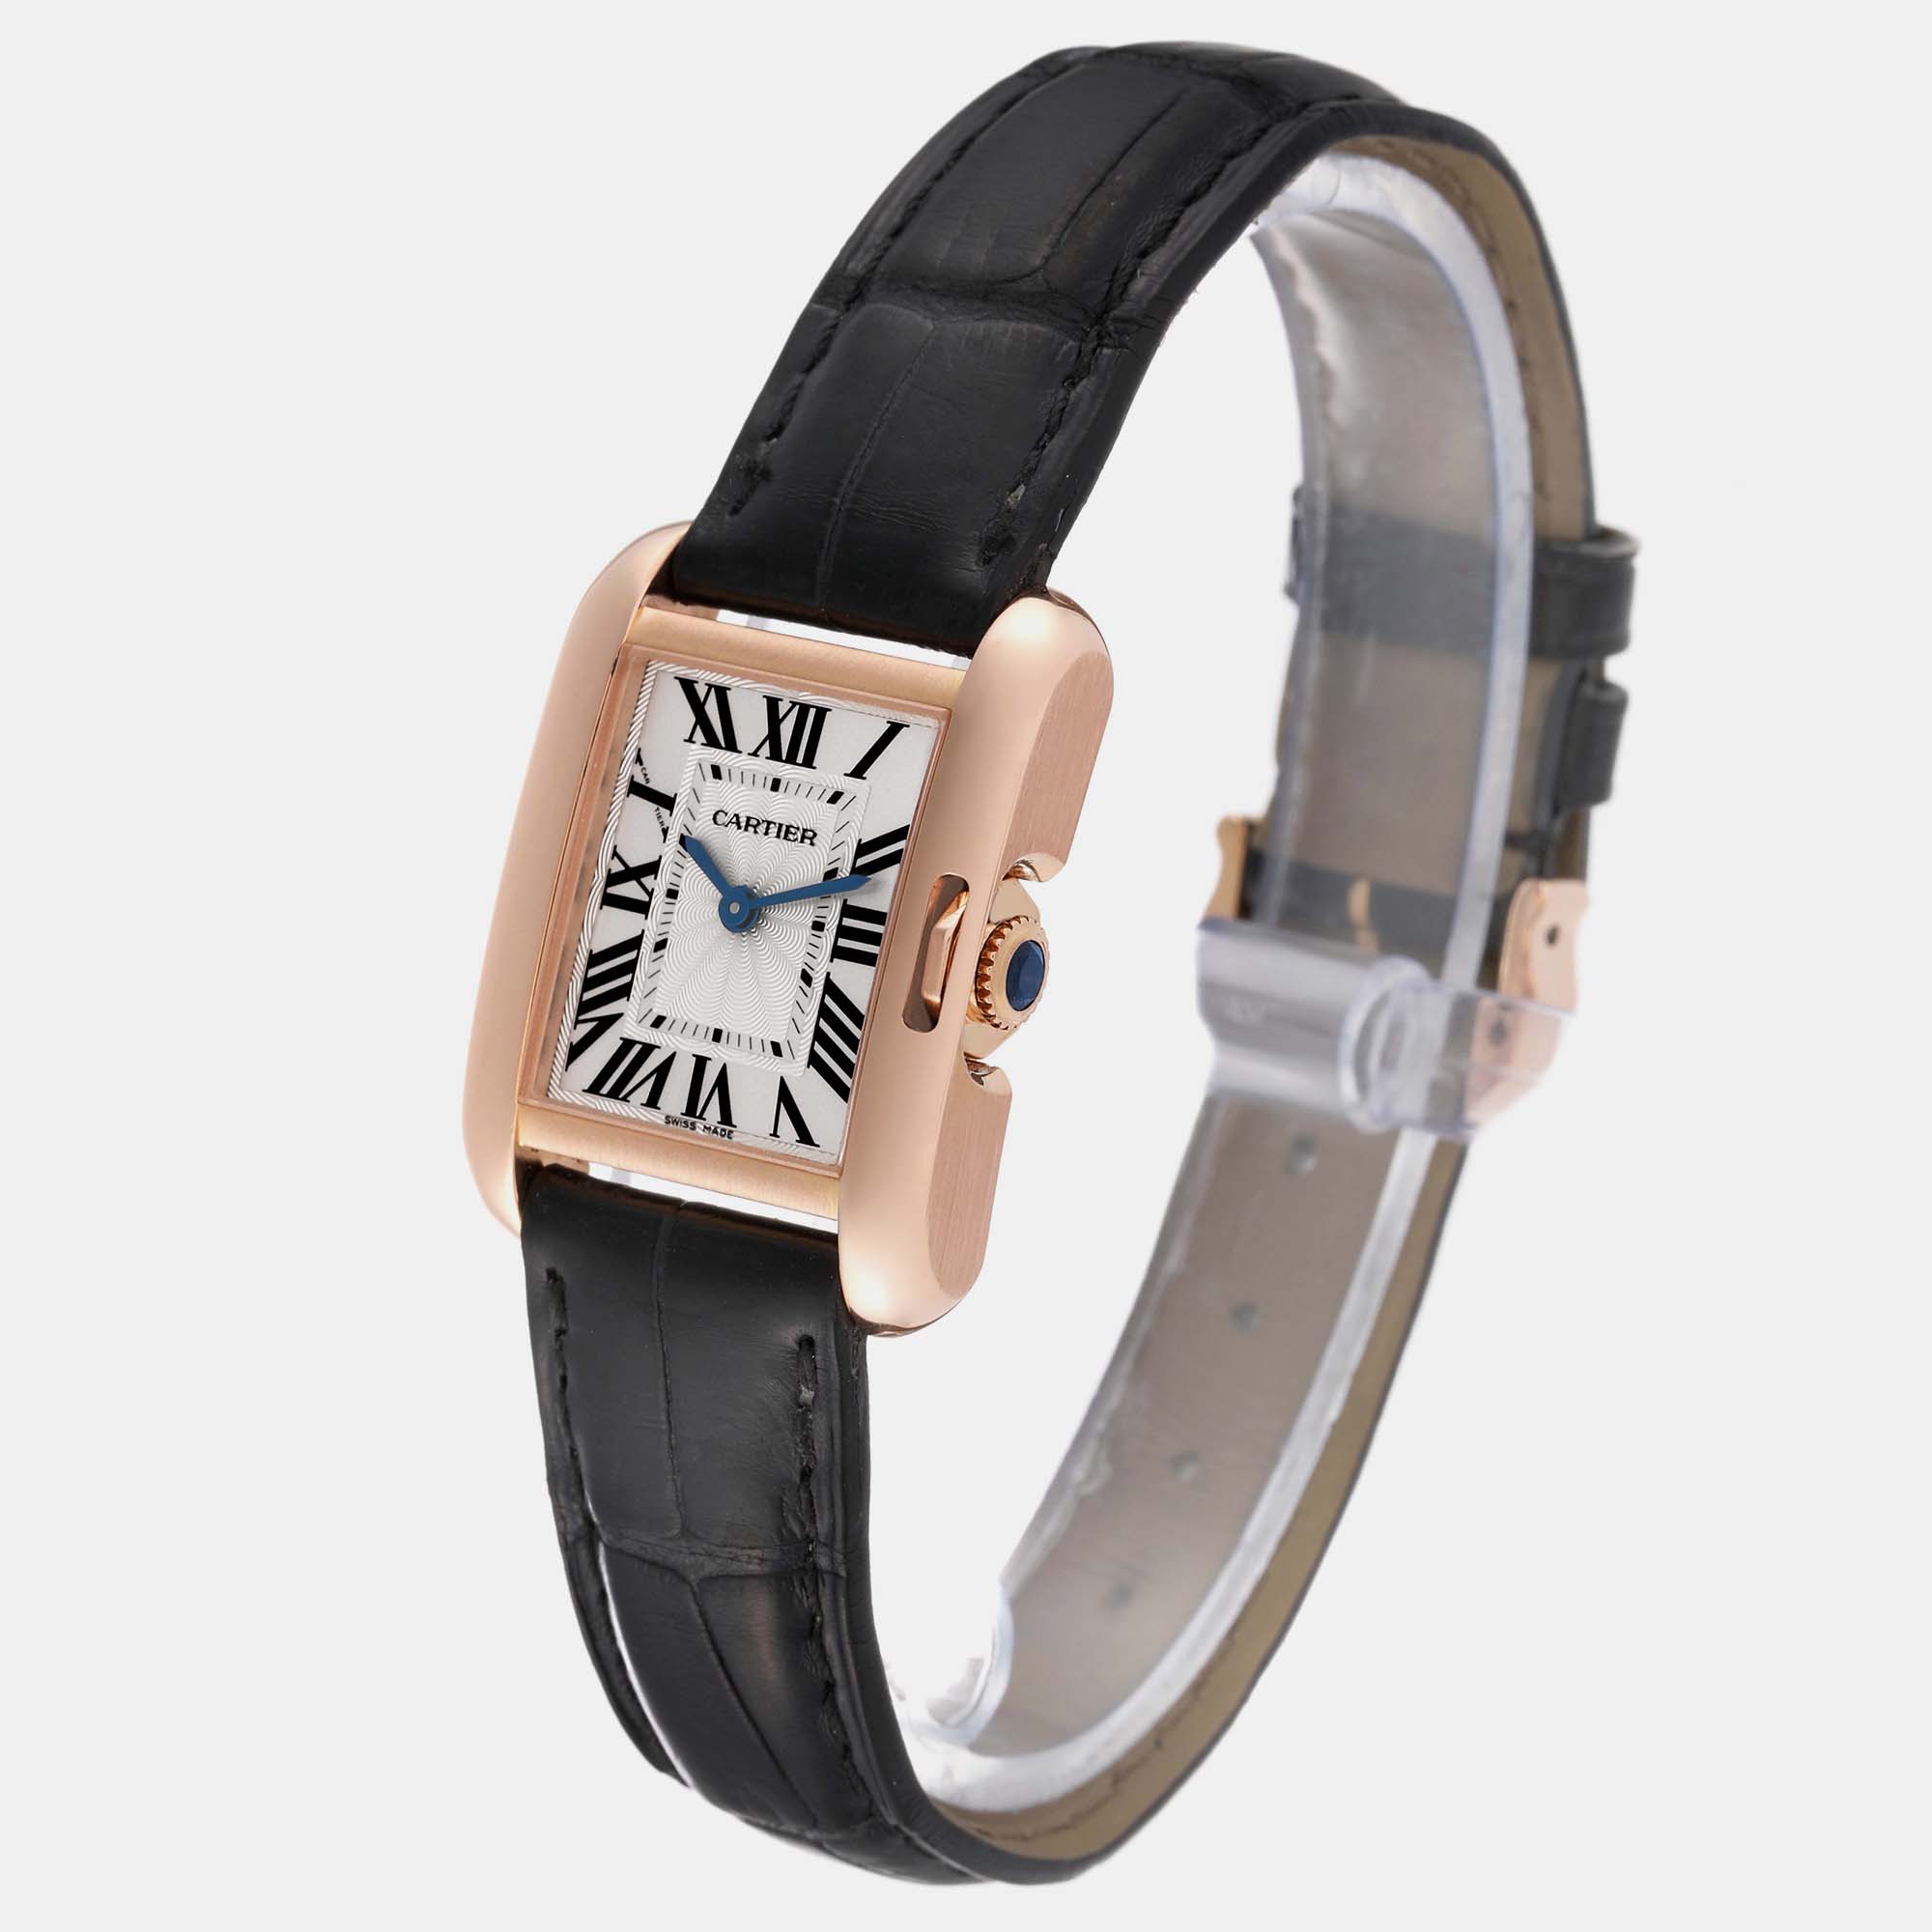 Cartier Tank Anglaise Rose Gold Small Ladies Watch W5310027 30 Mm X 23 Mm